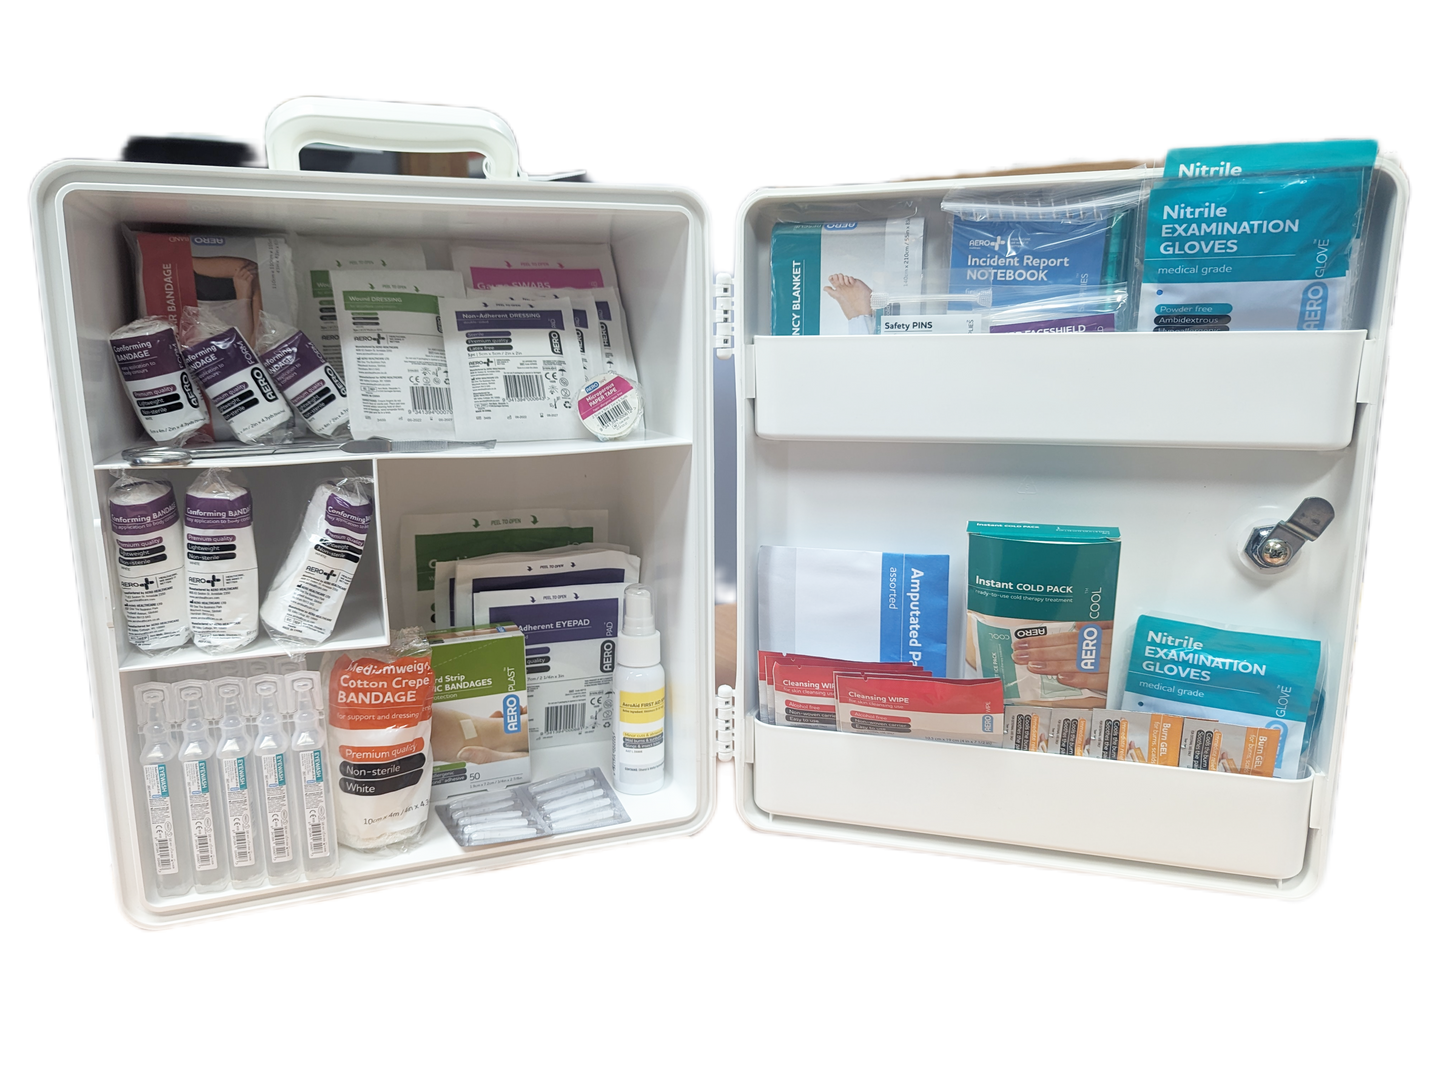 Wall Mounted First Aid Cabinet 10 person Large-Kits, Bags & Cabinets-Assurance Training and Sales-Assurance Training and Sales